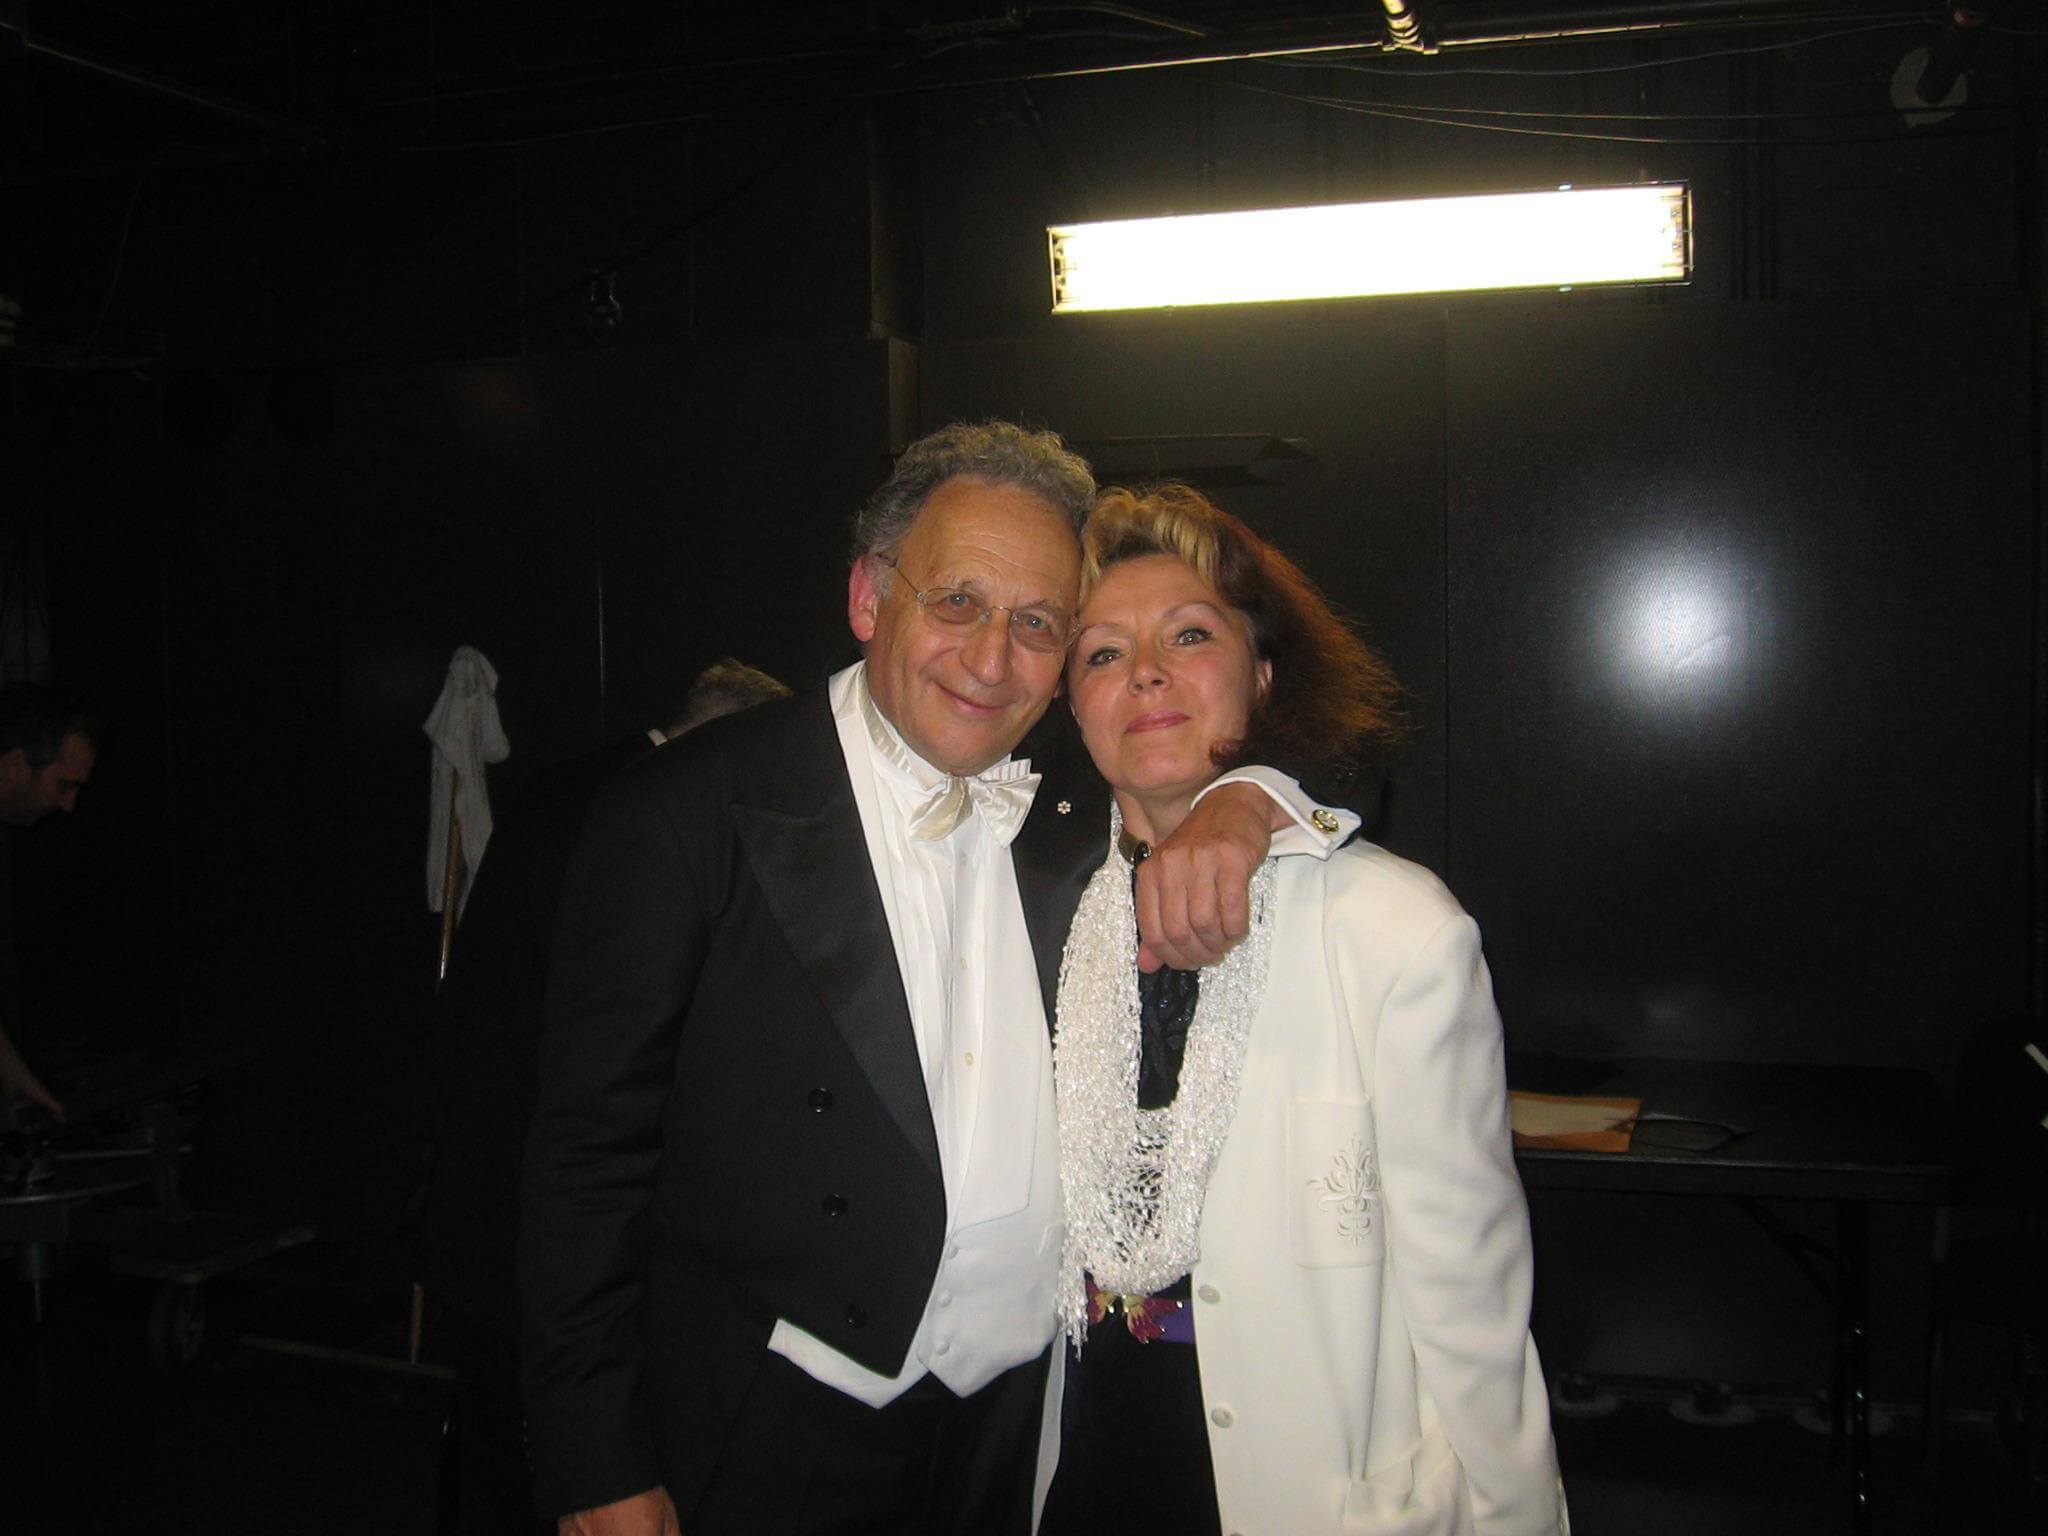 With My dear, unforgettable Friend Maestro Boris Brott....Thank you, dear Maestro, for your wonderful interpretation of my music with your McGill Chamber Orchestra, OCM and NAOC...... You are Great Person with big soul and heart... So sad... My prayers to all your family... Rest in peace, my dear Genius Maestro Boris Brott....